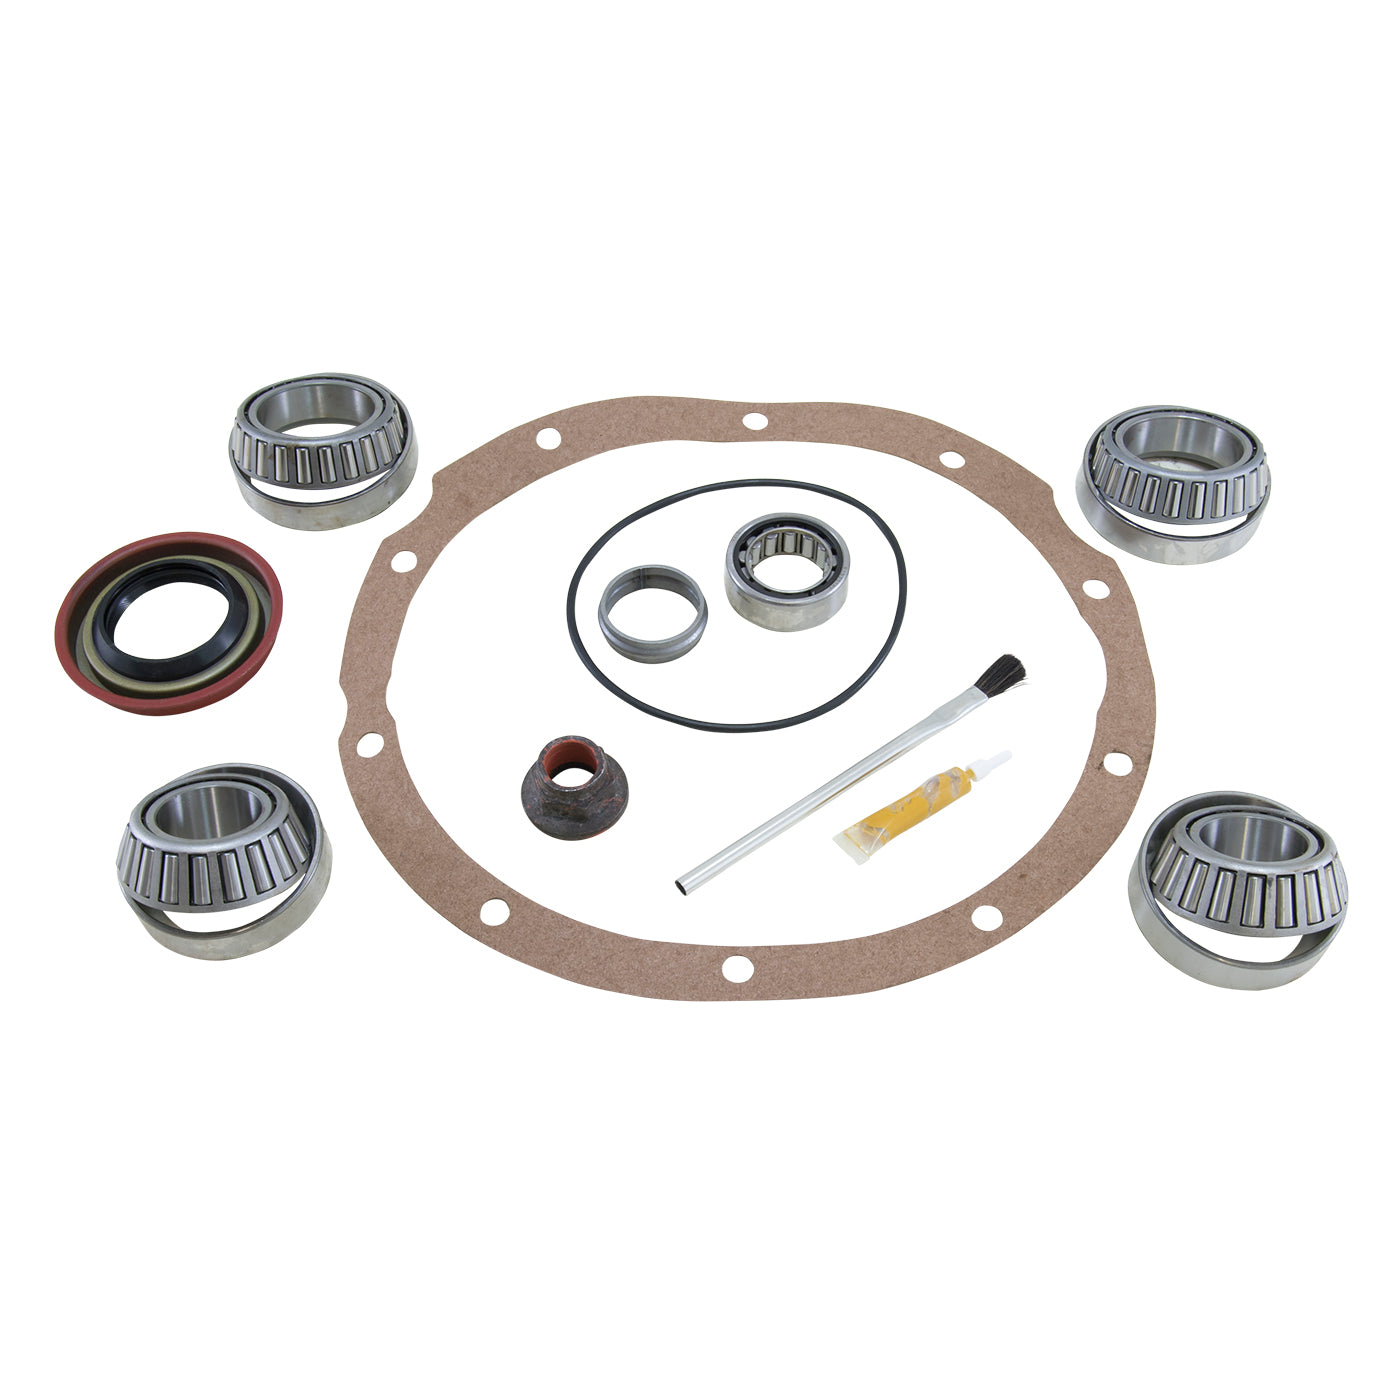 Yukon Gear Bearing install kit for Ford 8" differential BK F8